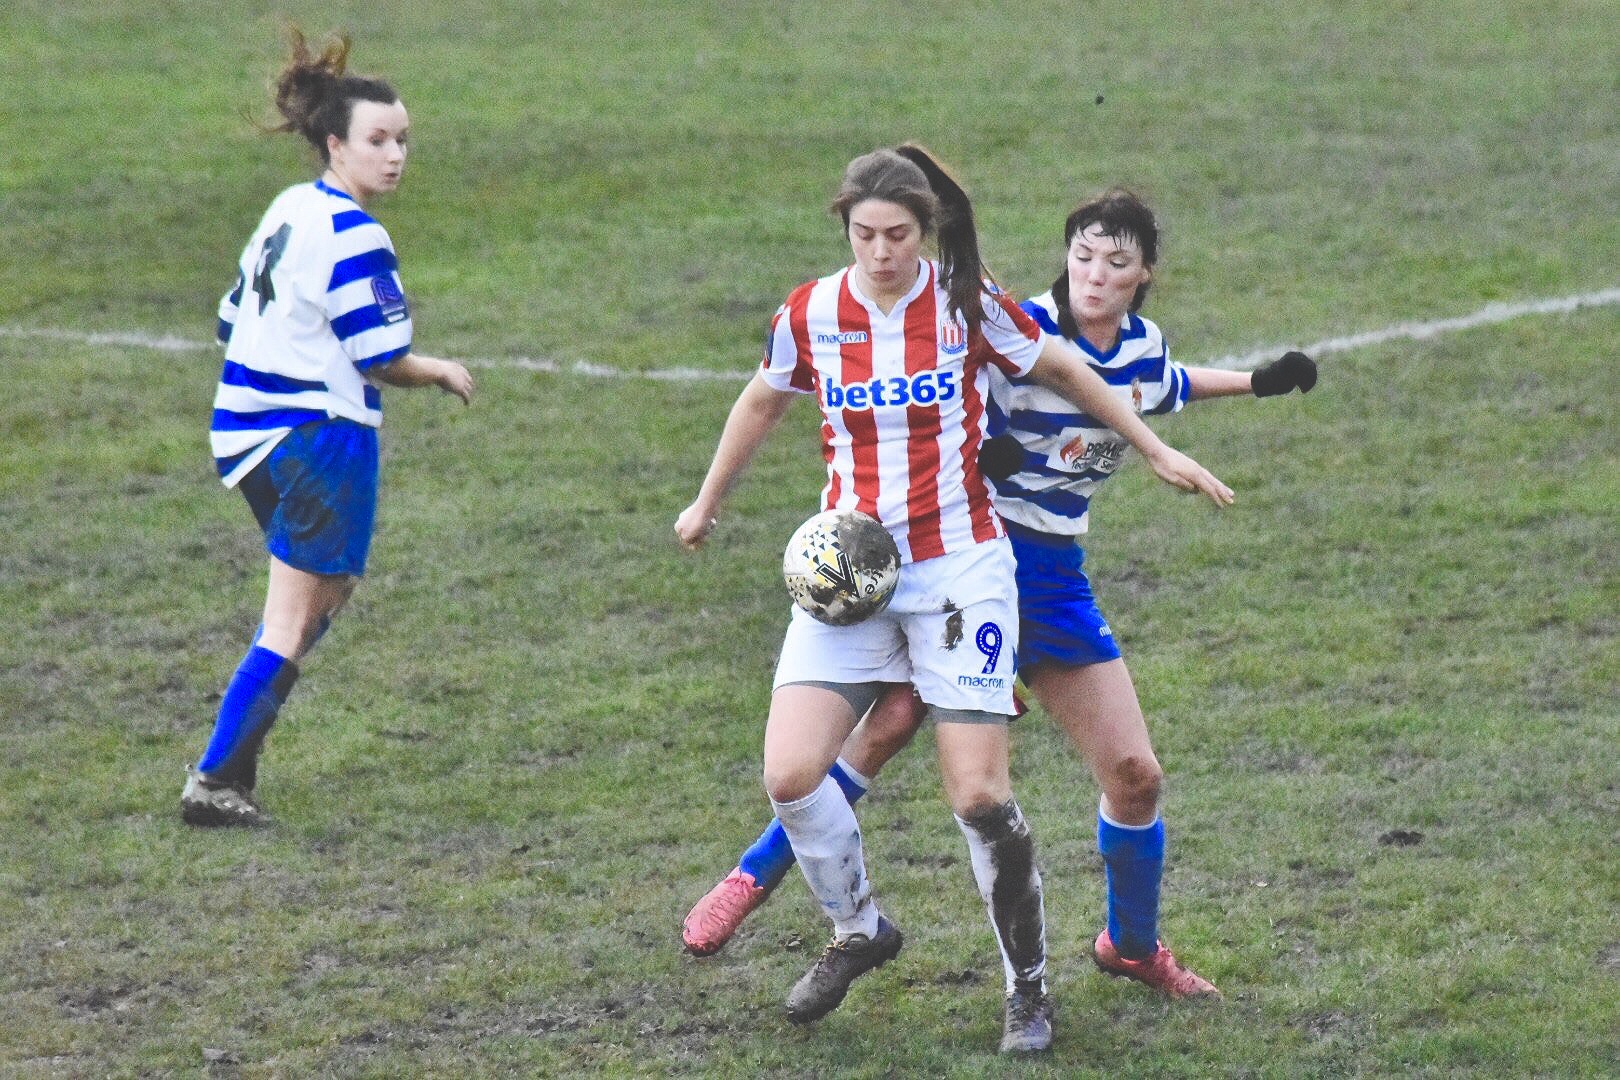 Amy Hughes for Stoke City Ladies against Chester-Le-Street in the SSE FA Cup.